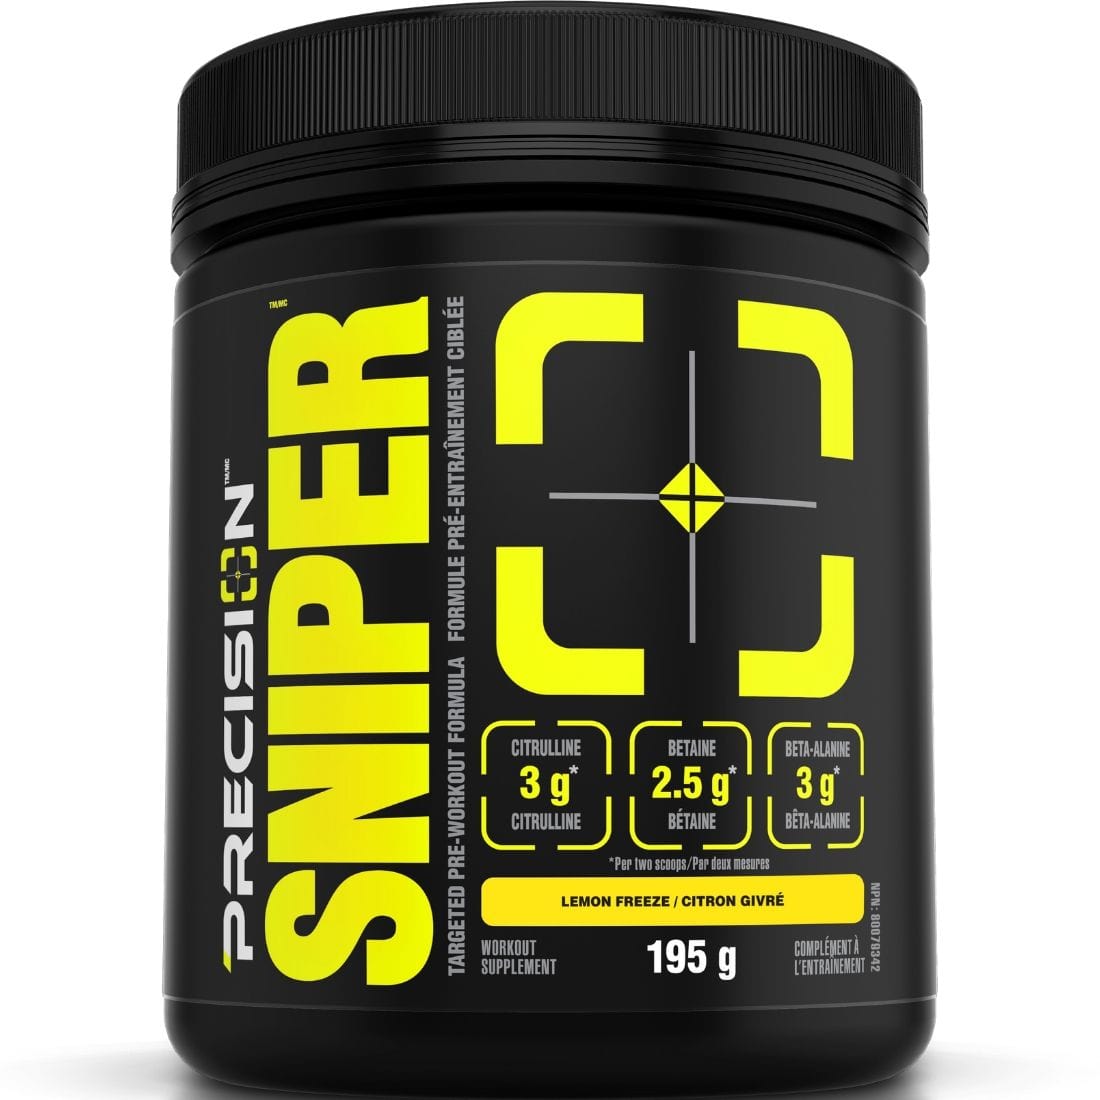 Precision SNIPER Pre-Workout and Gaming Formula, 195g